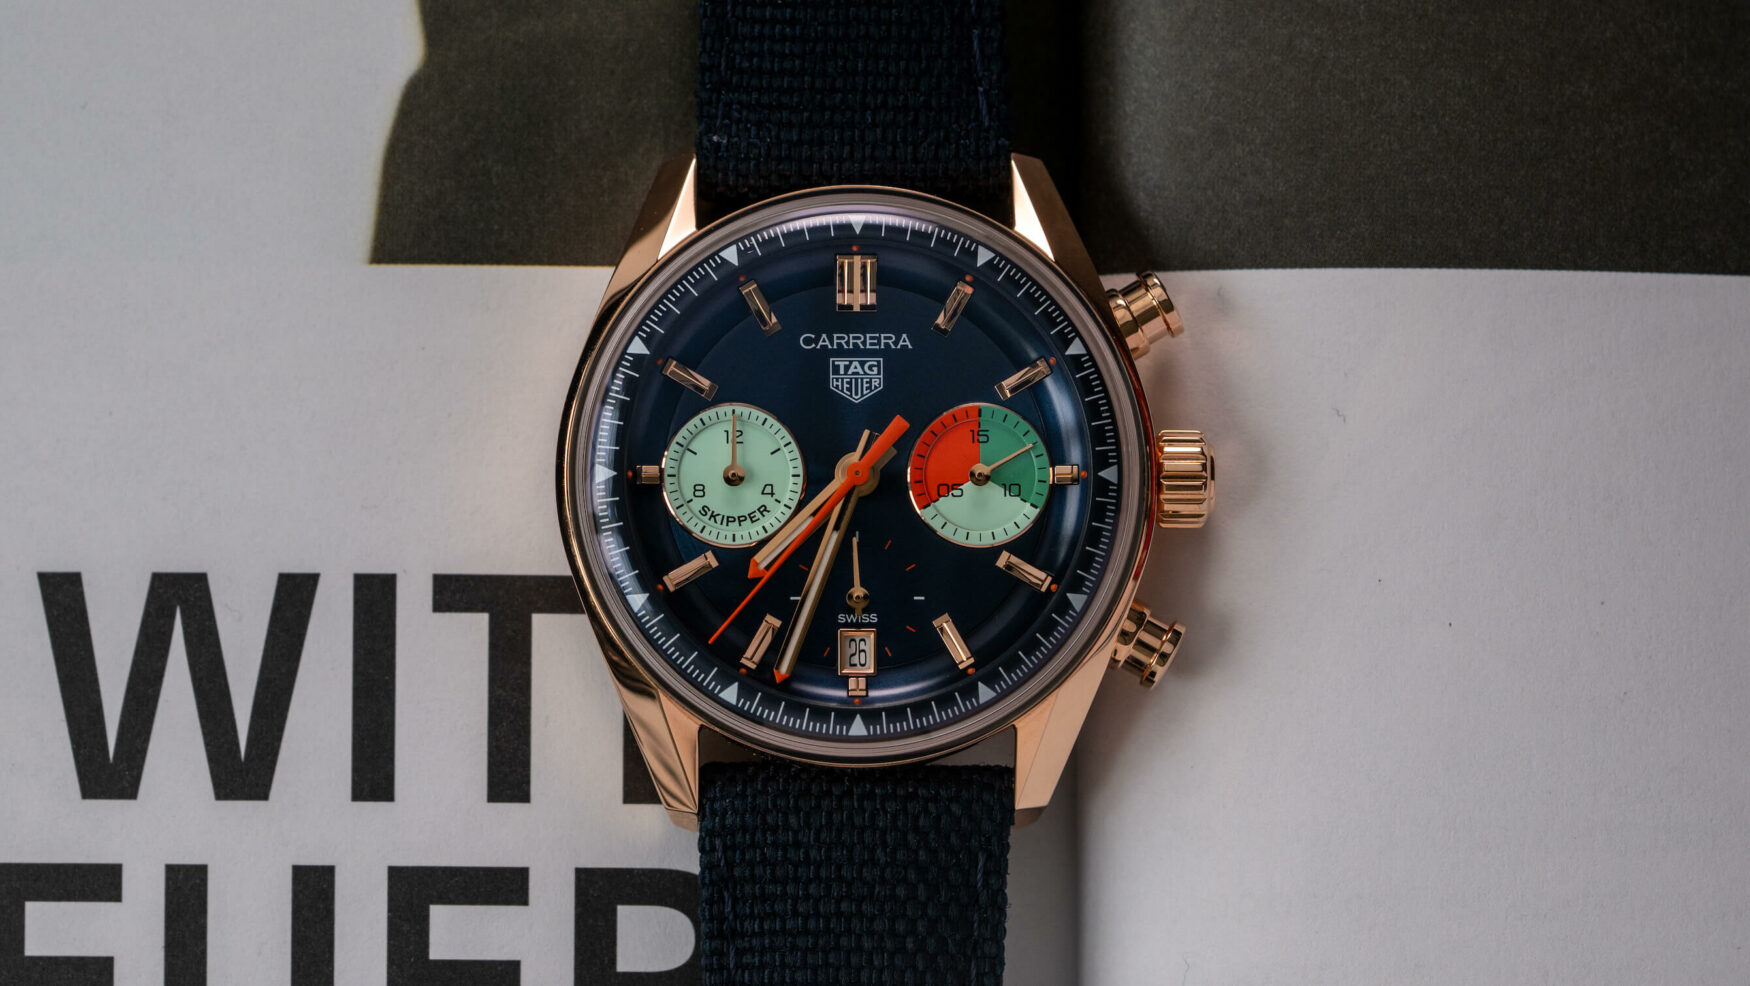 New watch alert: Andrew unboxes his precious TAG Heuer Skipper